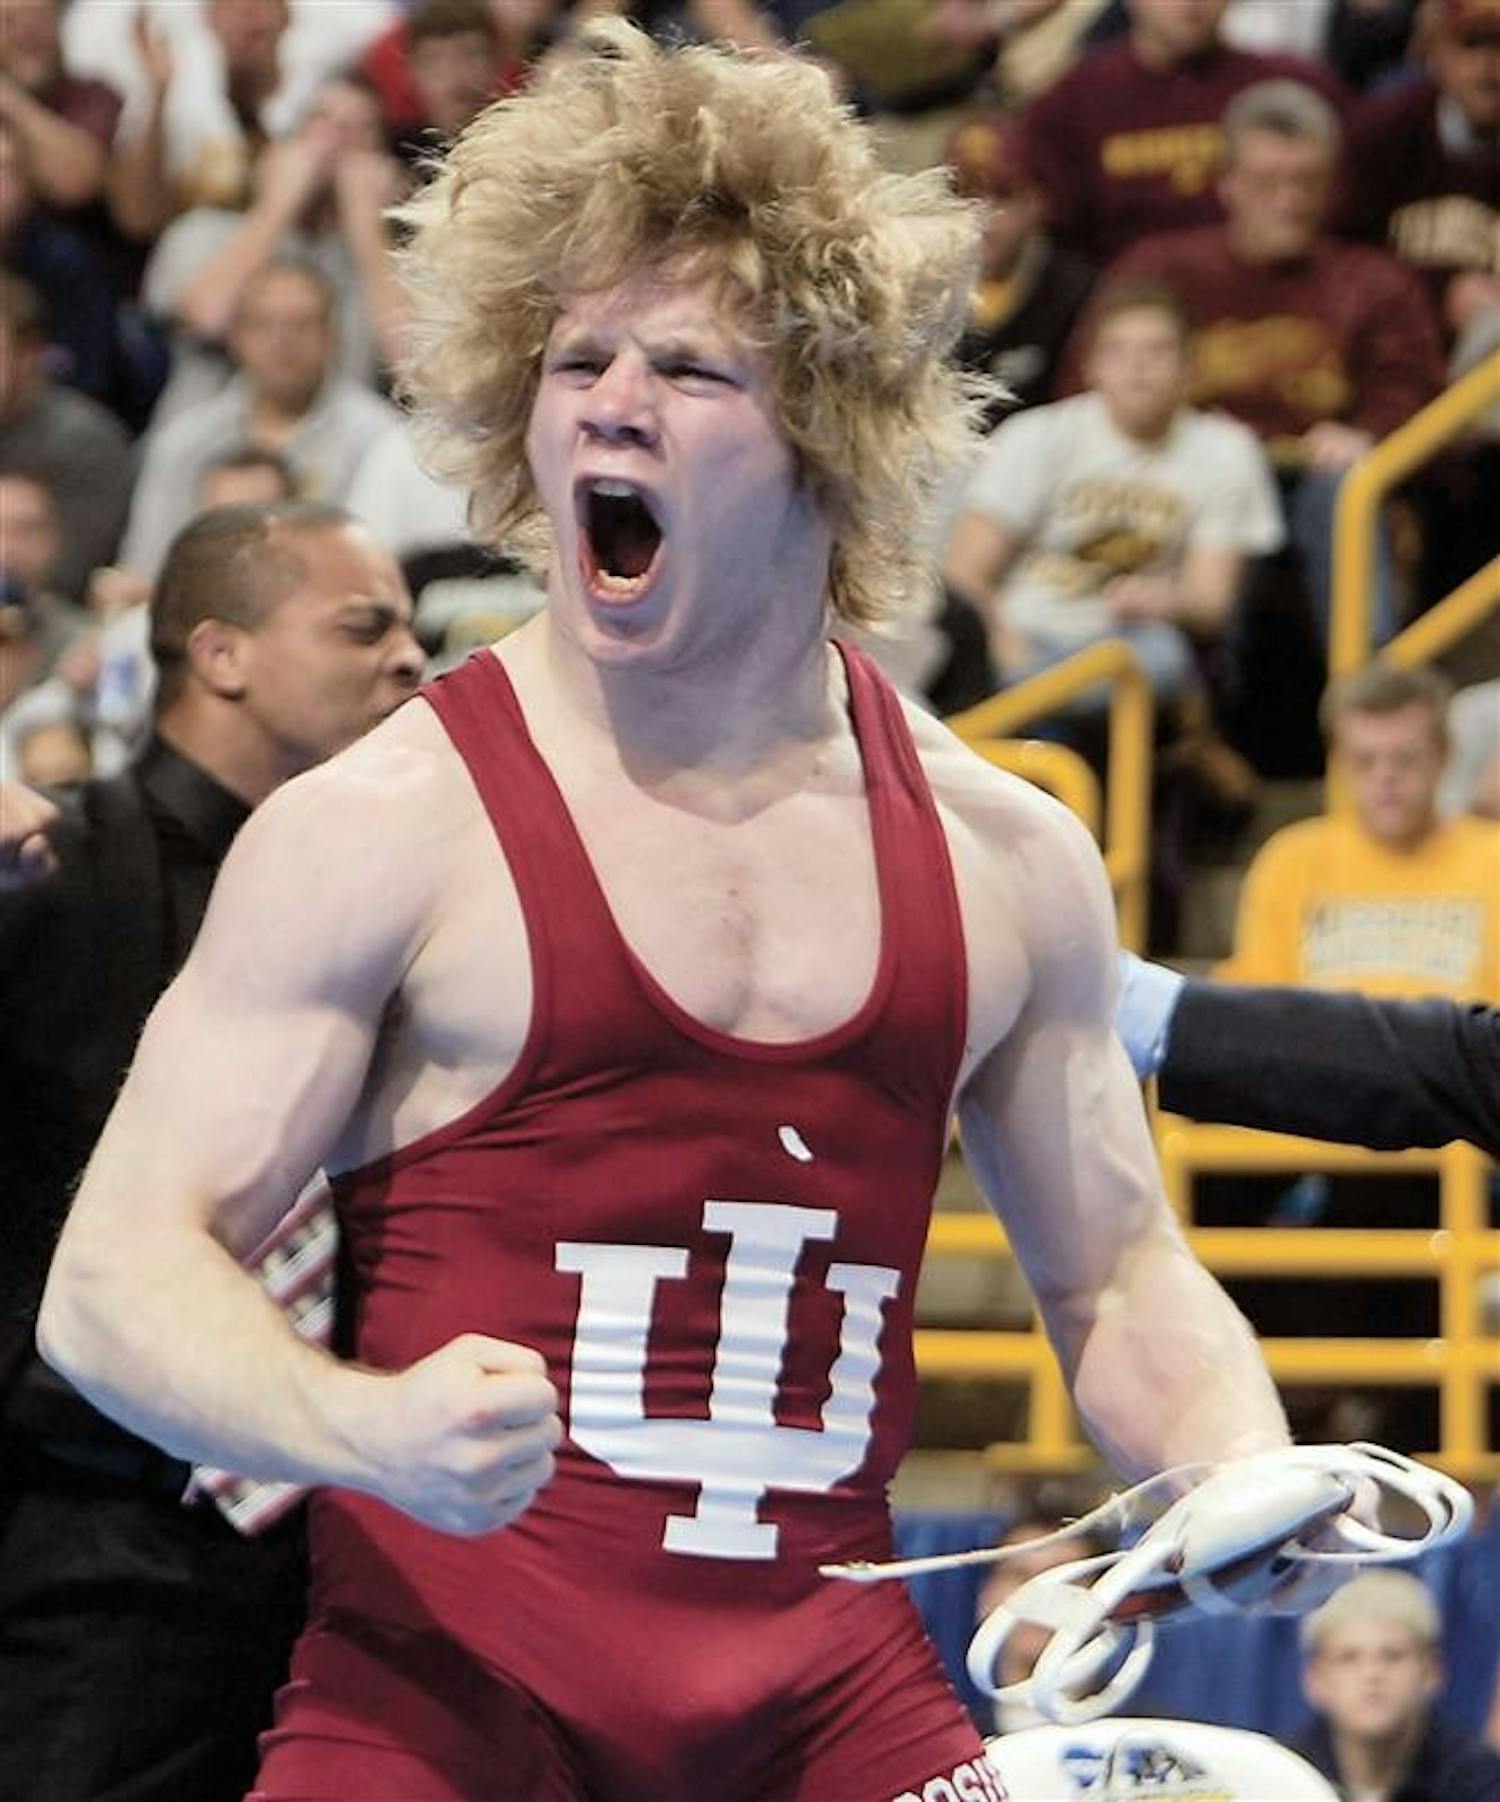 Indiana's Joe Dubuque celebrates after upsetting number one seed Sam Hazewinkel 3-1 in the 125-pound semifinal match Friday, March 18, 2005 at the NCAA Division I wrestling championships in St. Louis. 